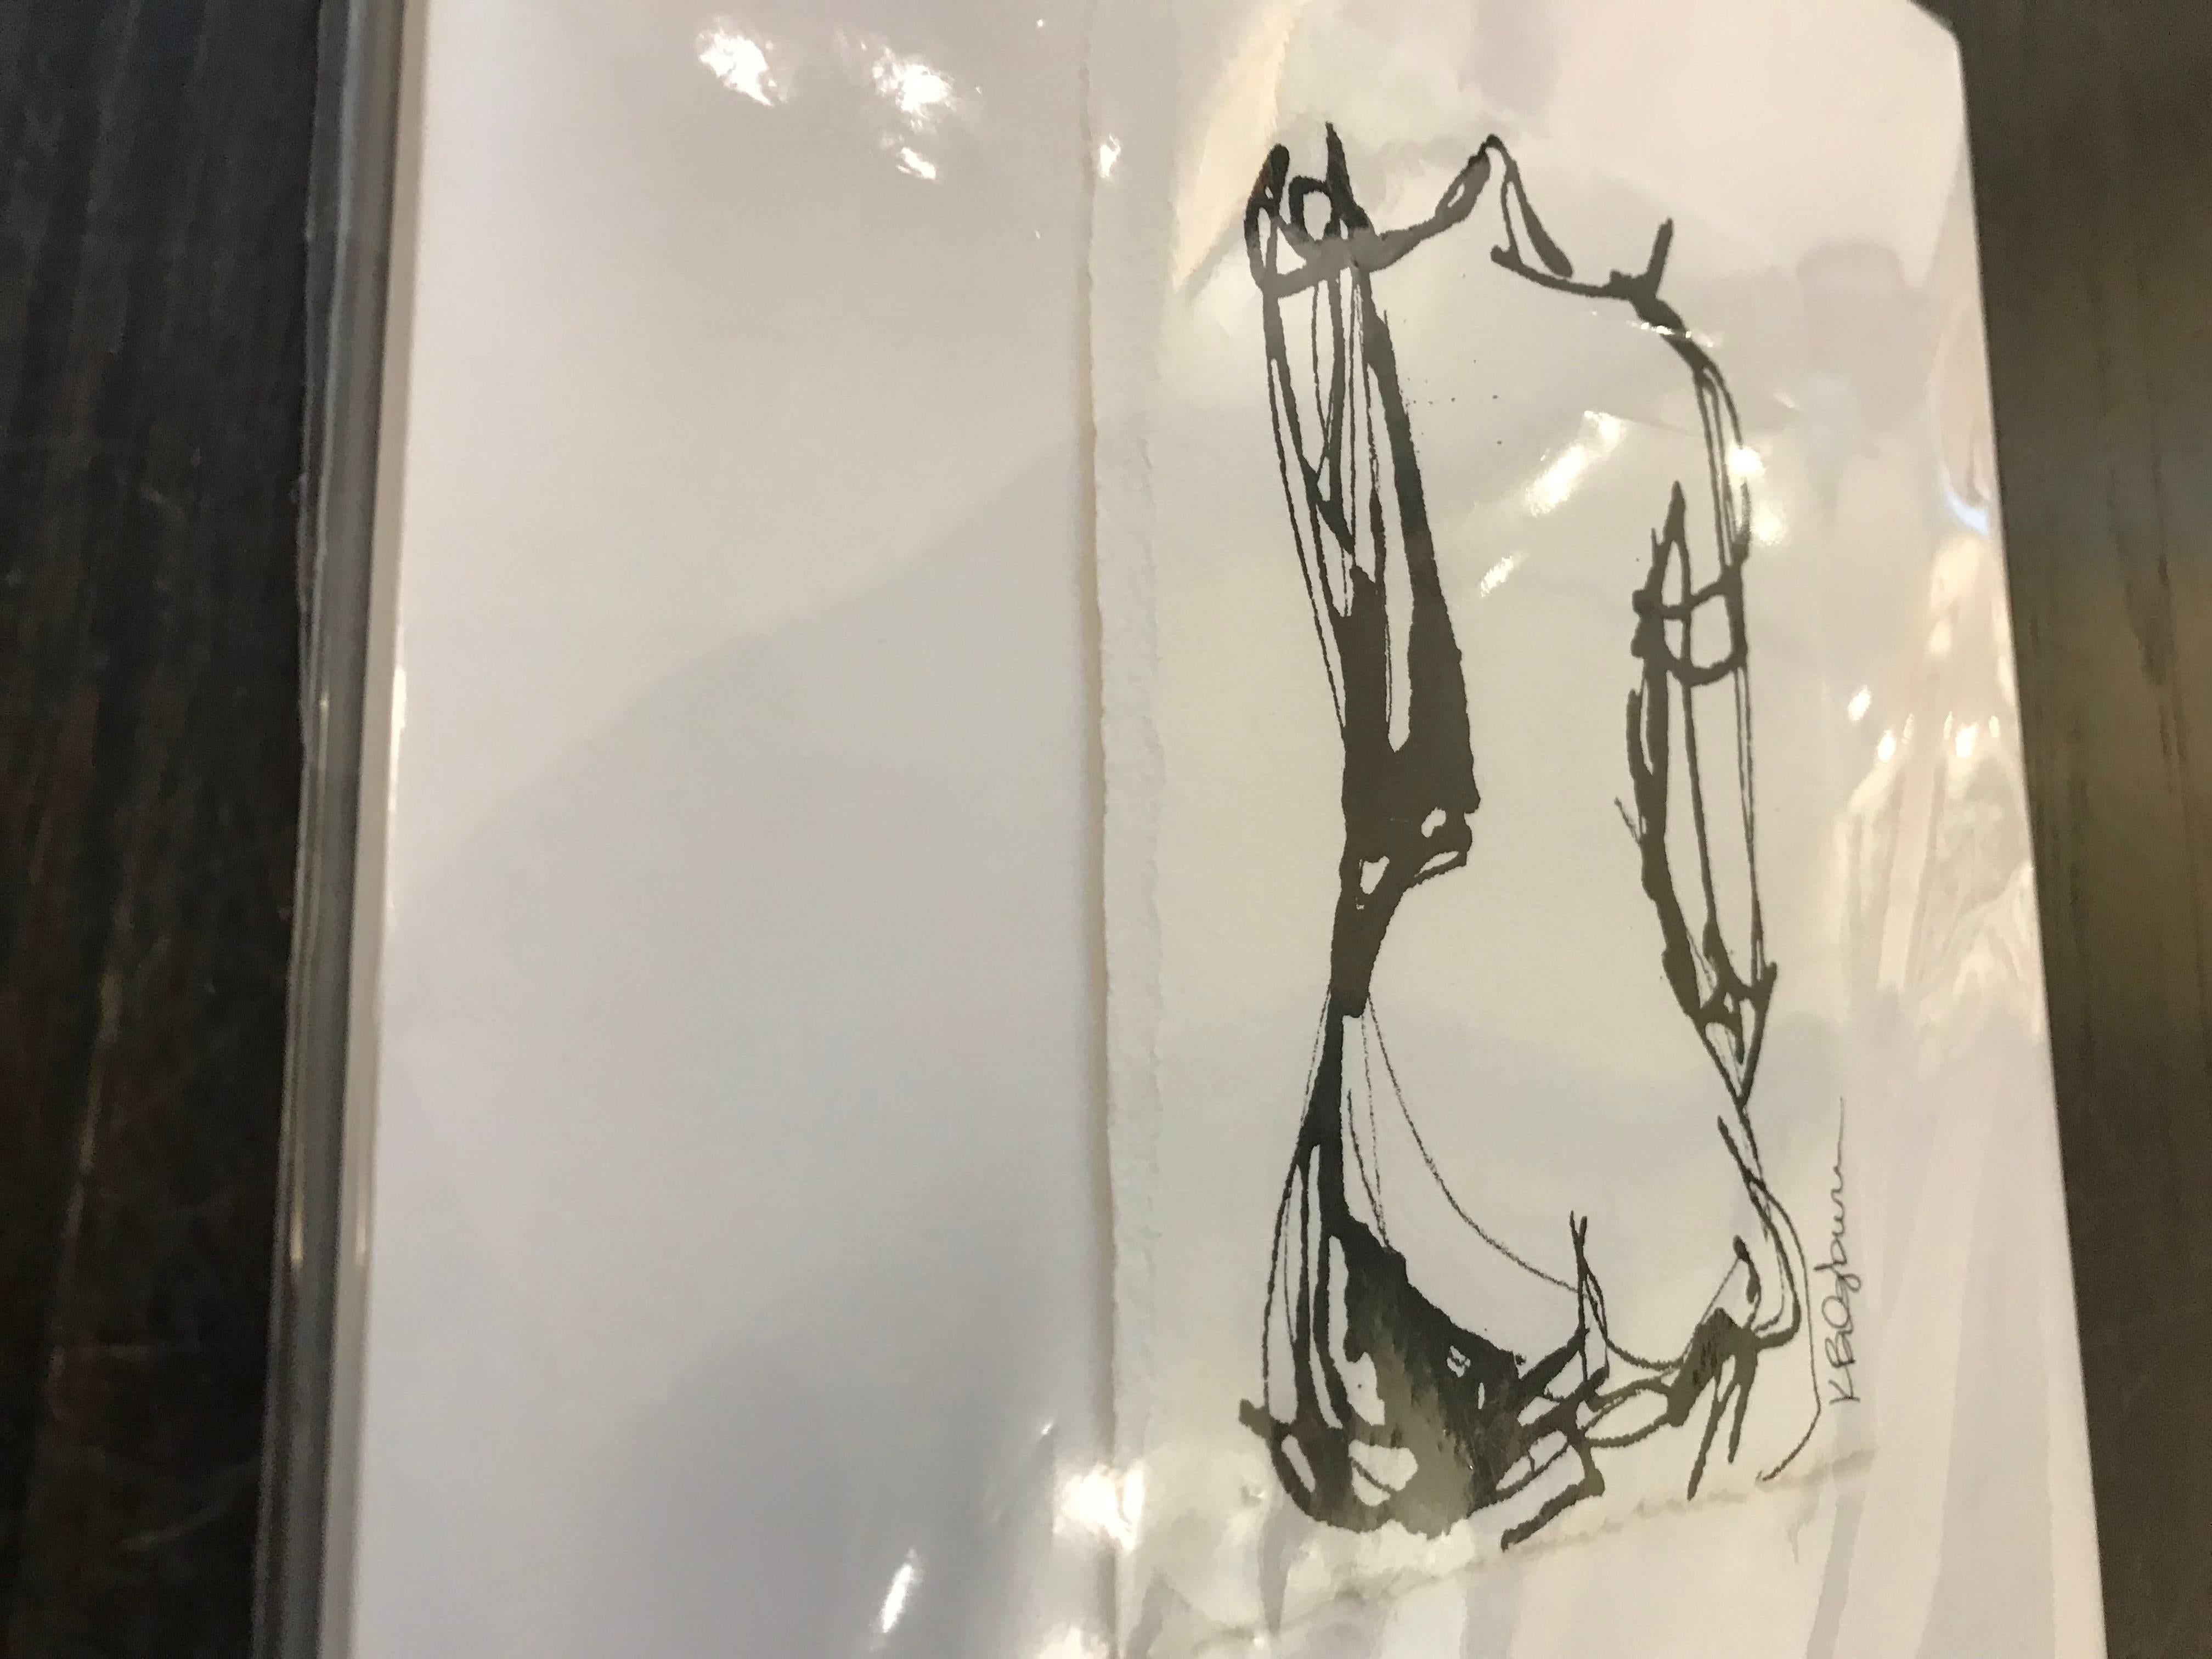 This ink on paper nude figurative piece depicts a woman facing the opposite direction sitting on her knees.  Her head is slightly tilted over her right shoulder and her right arm is subtly extended.  The contour line, the application of paint, the